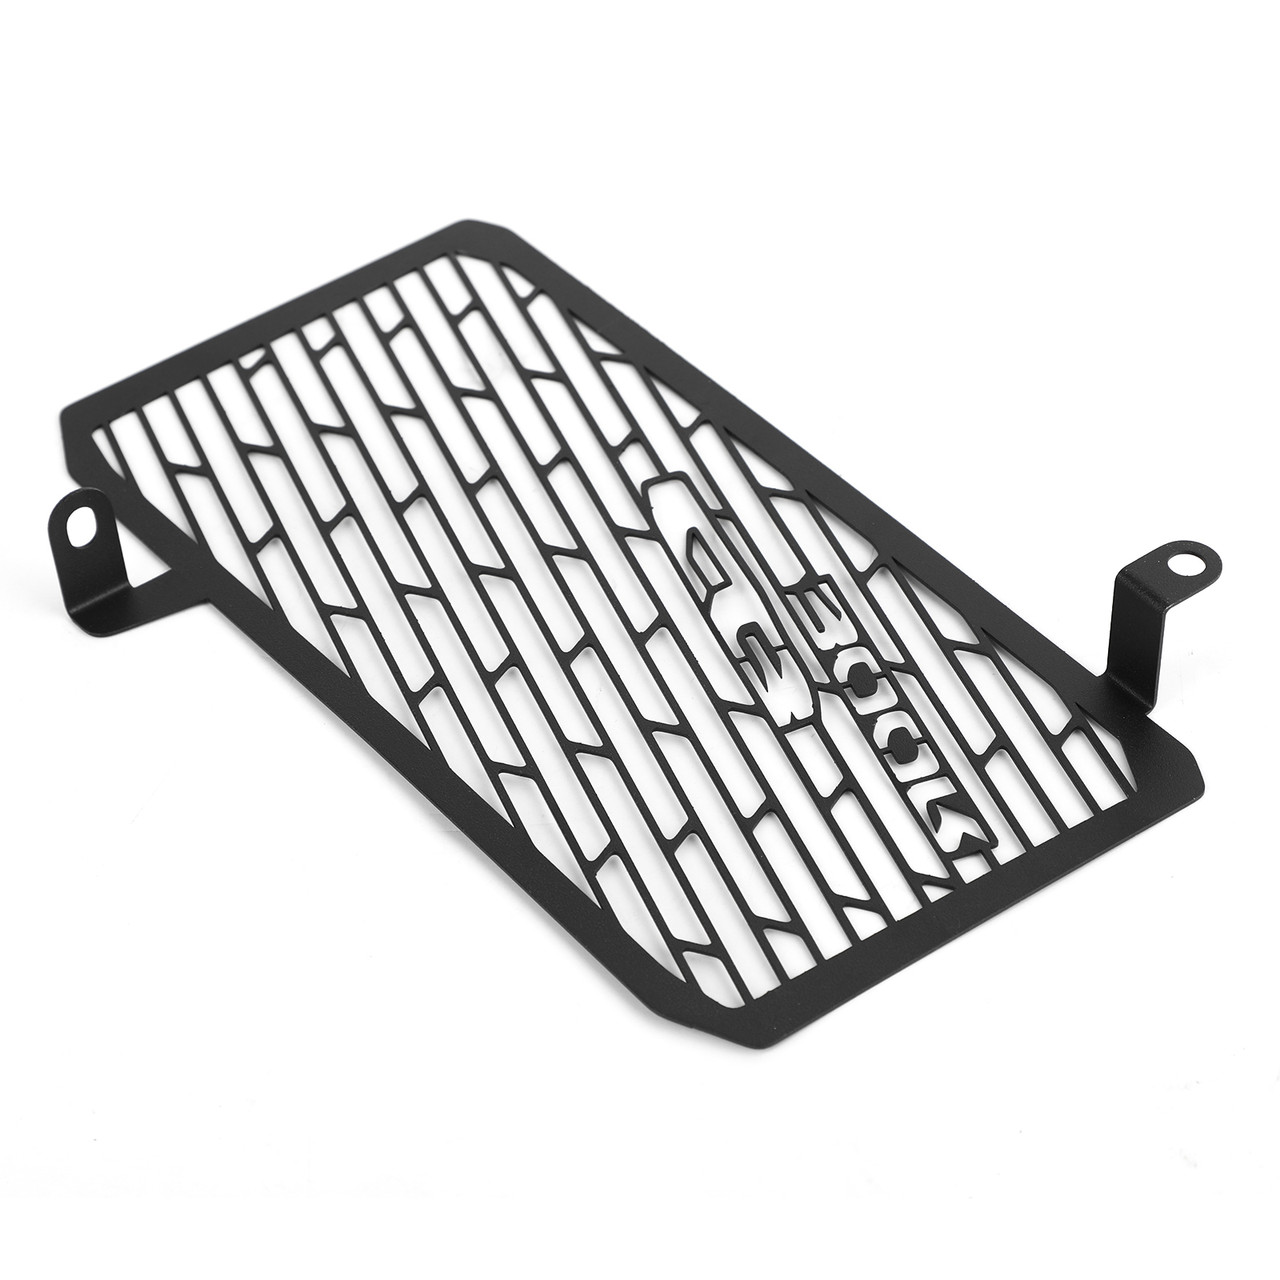 Stainless Steel Radiator Guard Protector Grill Cover Fit For Honda CB300R 18-20 Black